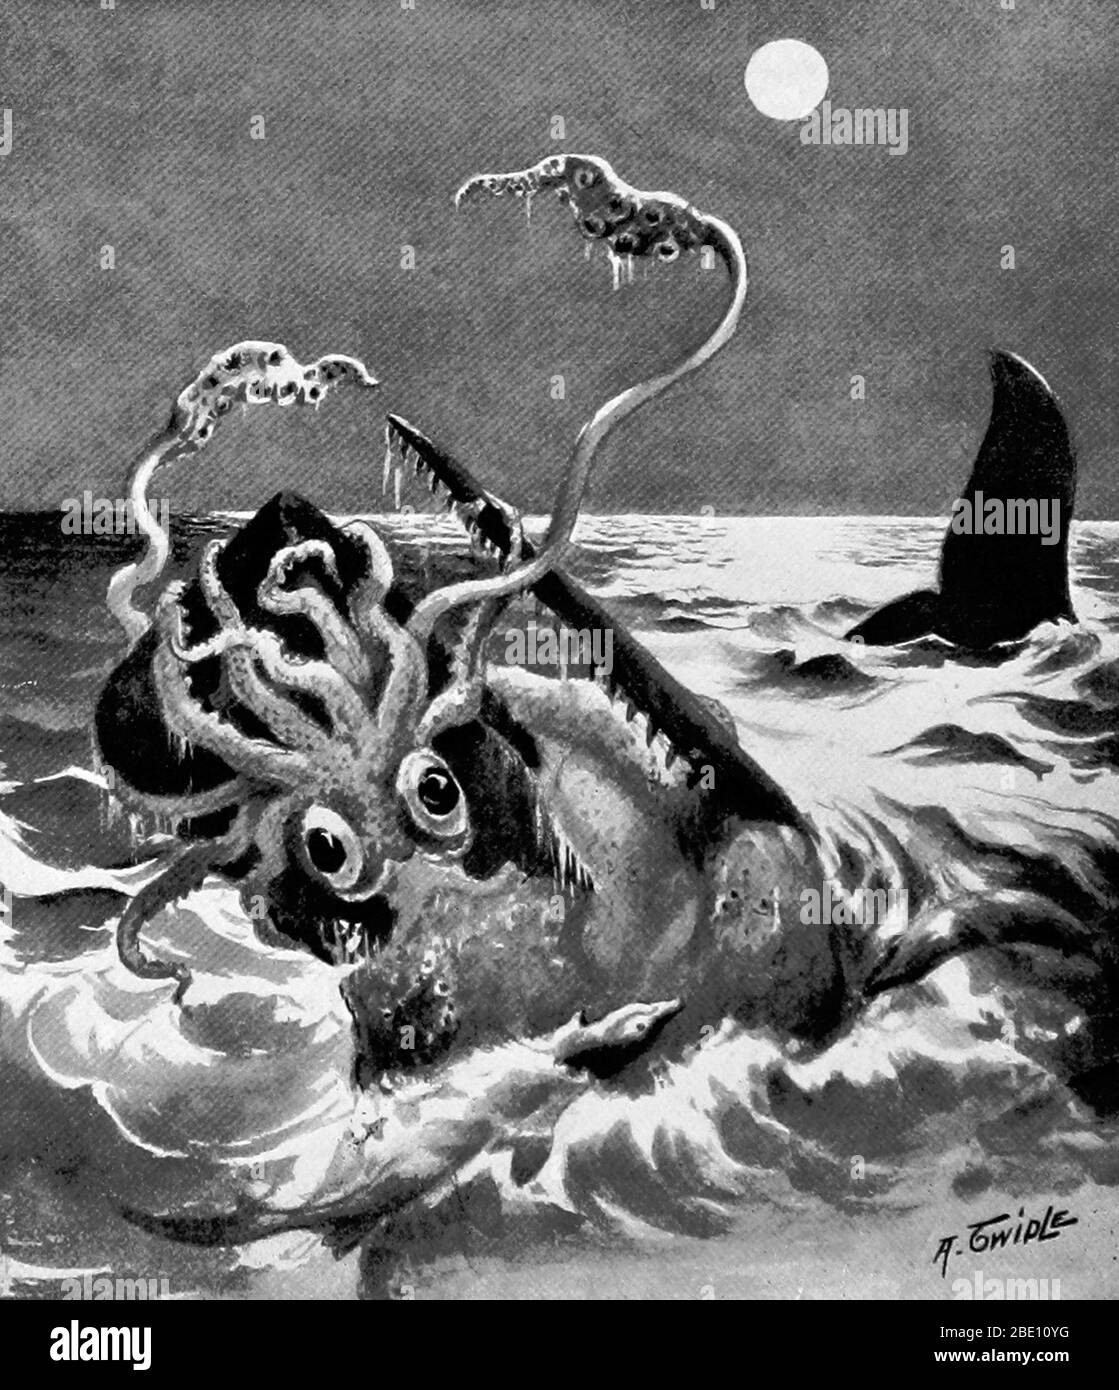 The giant squid's elusive nature and fearsome appearance have long made it a popular subject of legends and folk tales. Its popularity as an image continues today with references and depictions in literature, film, television, and video games. Often, the giant squid is represented as being in dramatic, evenly matched combat with a sperm whale. This powerful image is no longer considered accurate given the evidence that exists for a simpler predator-prey relationship between whale and squid, with the whale being the predator and the squid the prey. The Kraken is a legendary sea monstersaid to d Stock Photo